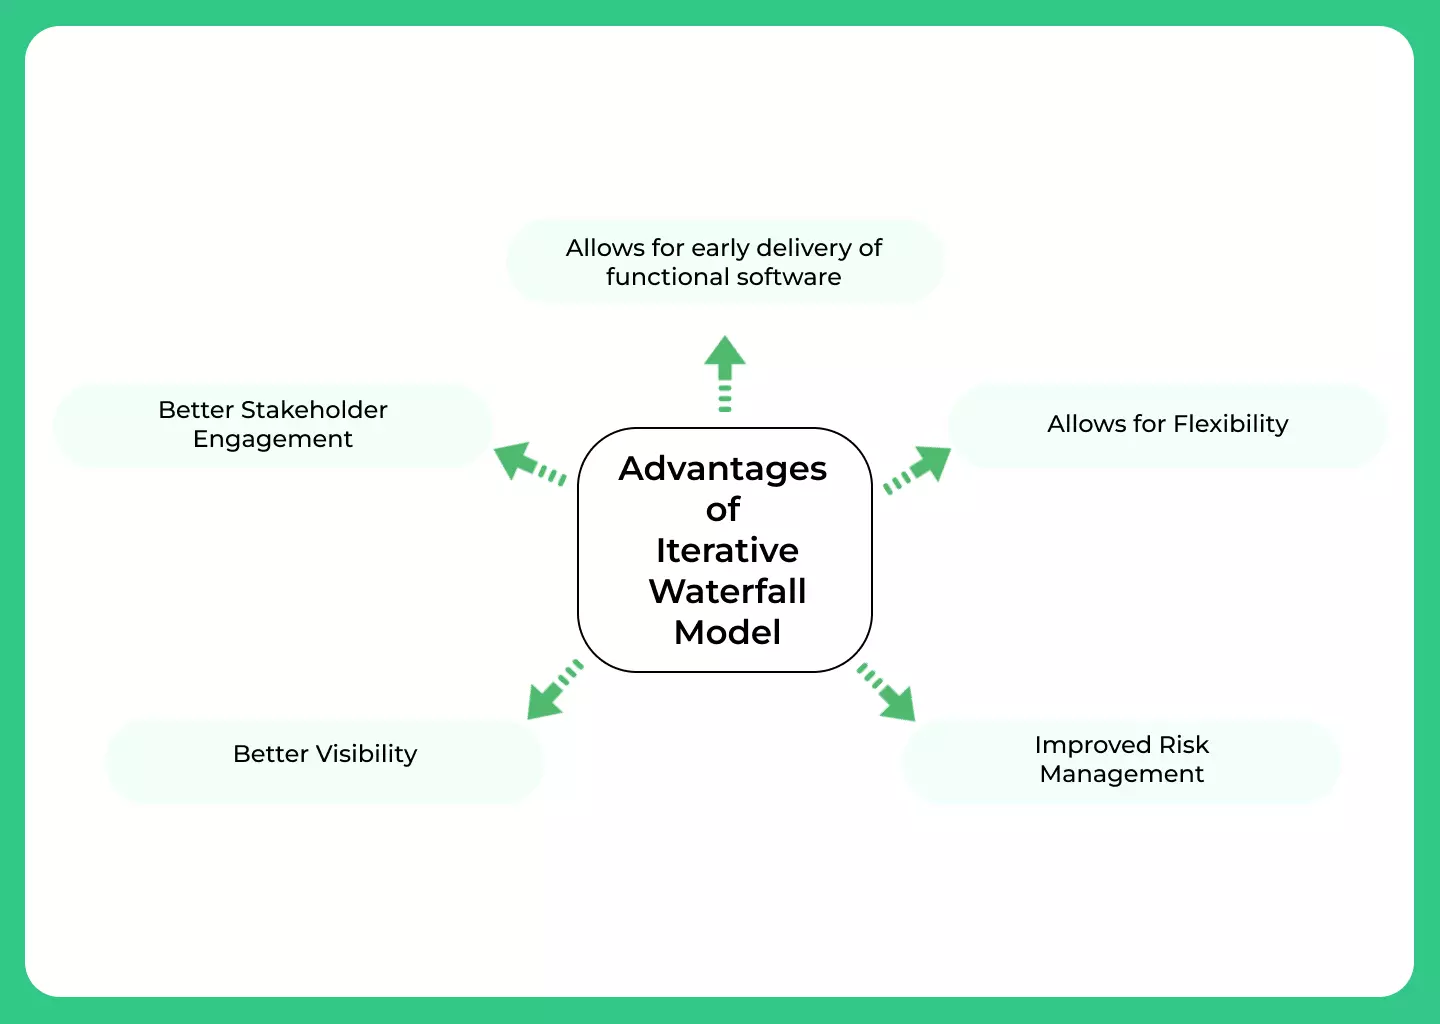 Advantages of Iterative Waterfall Model